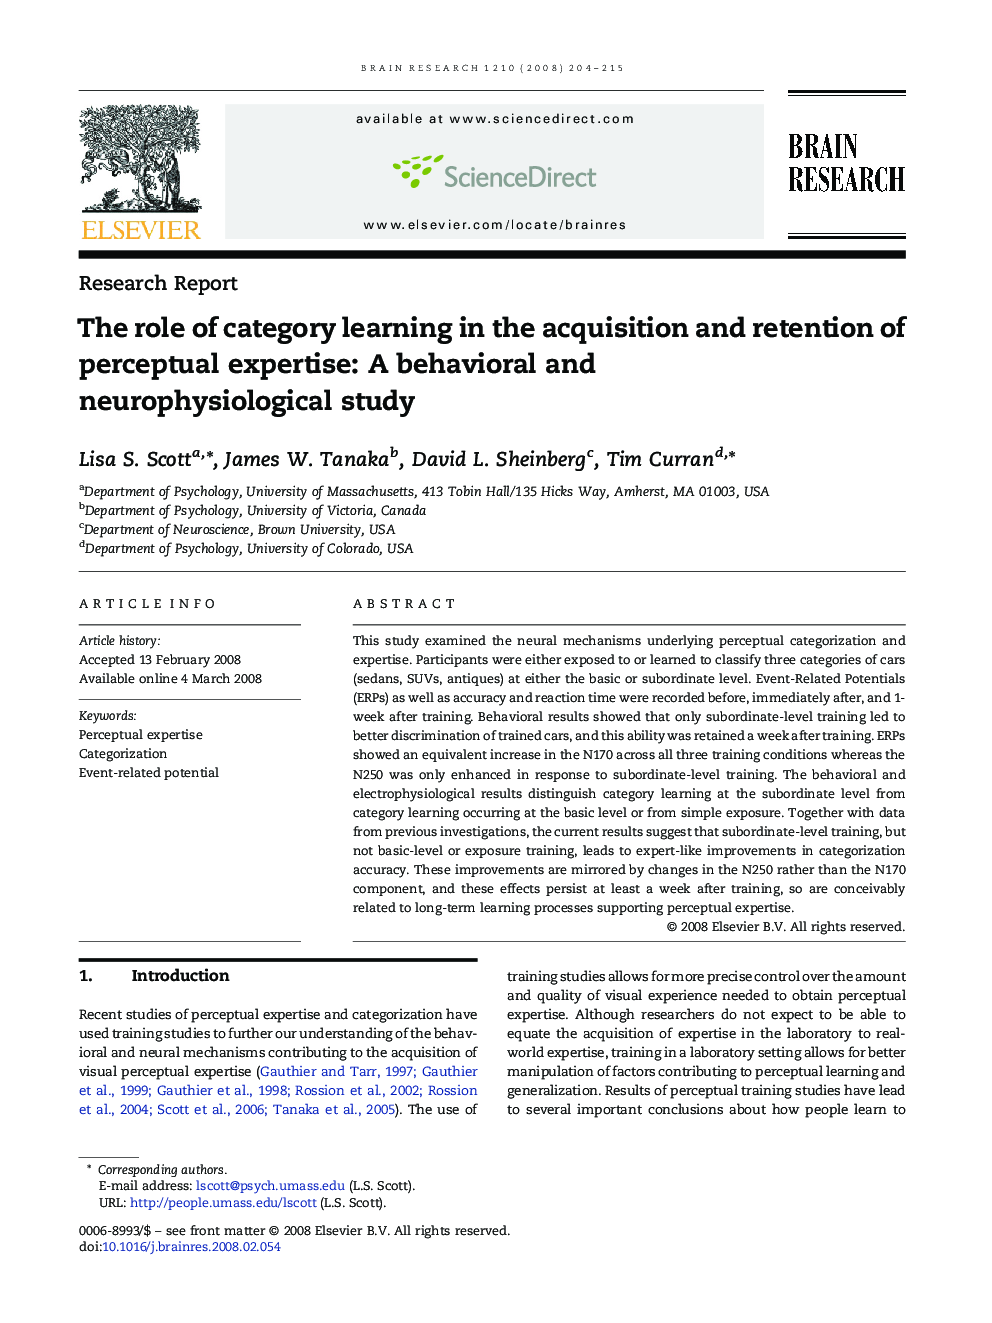 The role of category learning in the acquisition and retention of perceptual expertise: A behavioral and neurophysiological study